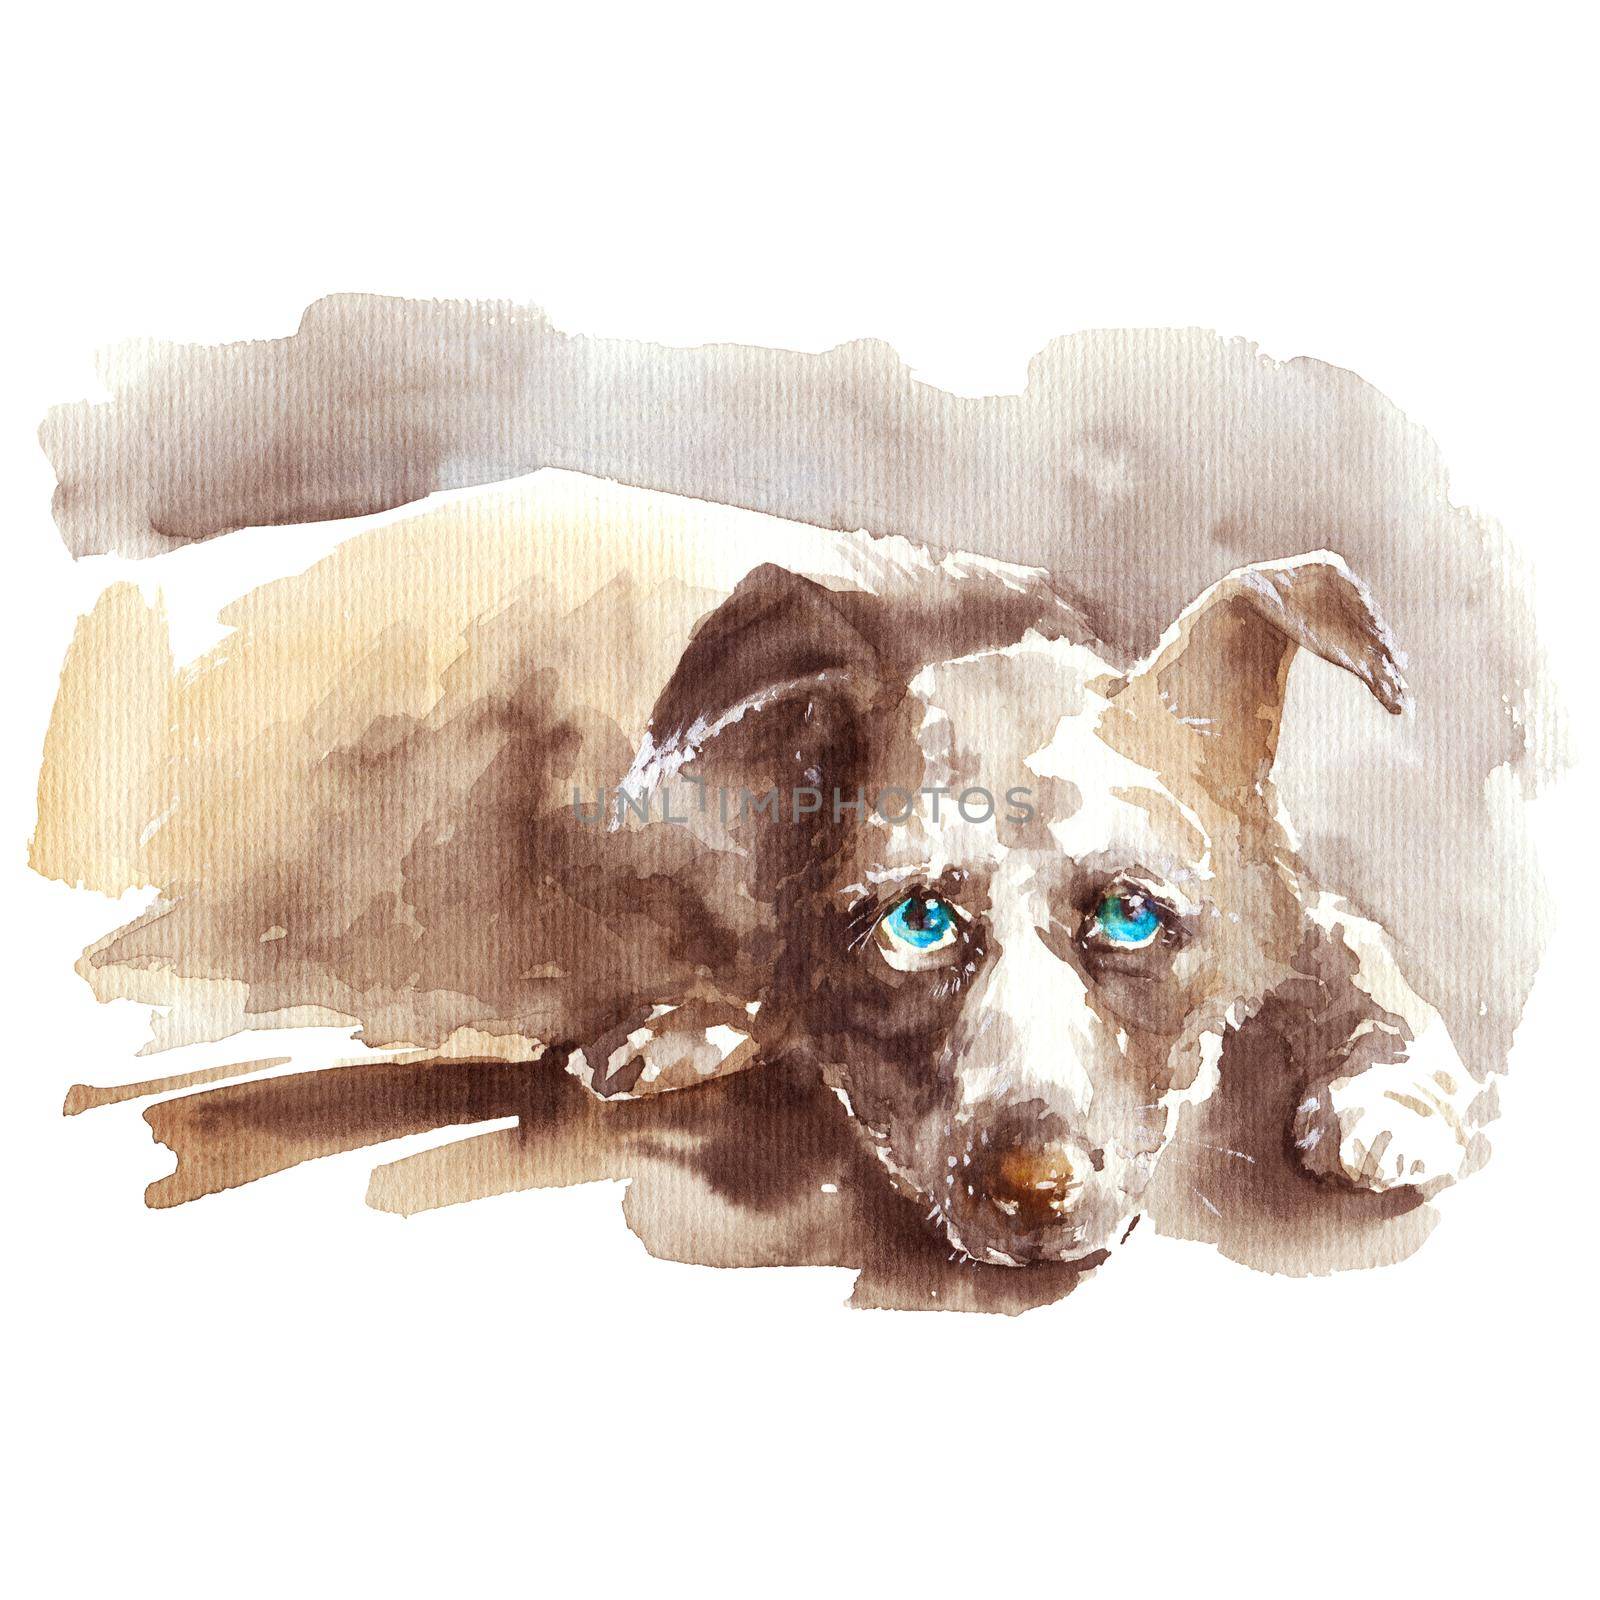 Watercolor illustration - portrait of lying dog with blight blue eyes, hand drawn sketch on white background